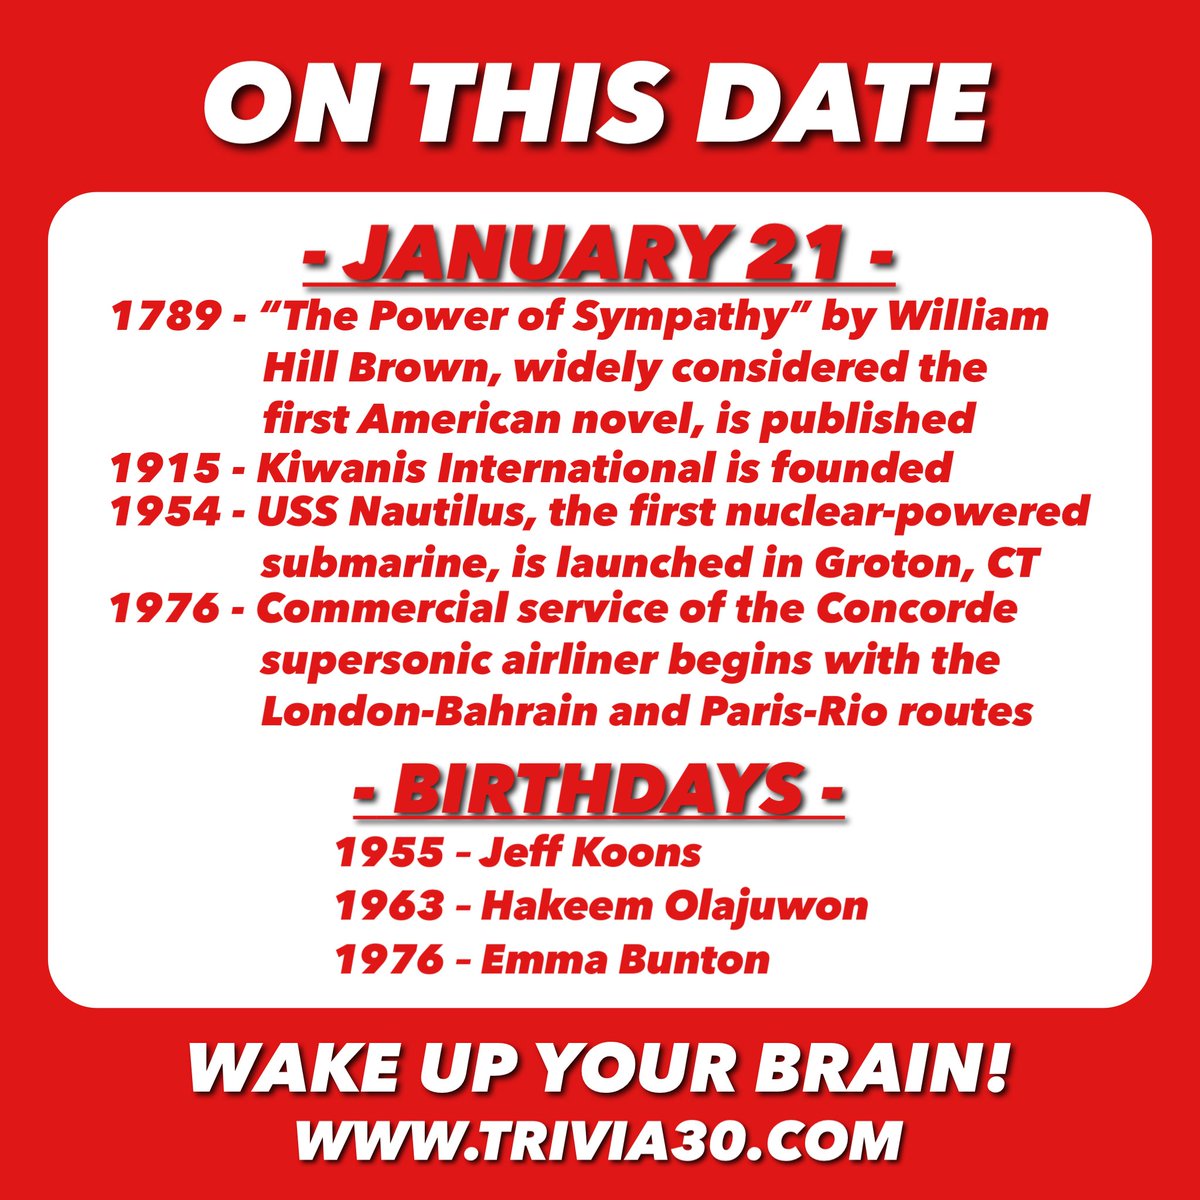 Your OTD trivia for 1/21... Have a great Saturday, and we will see you all soon! #TRIVIA30 #WakeUpYourBrain #OnThisDay #novels #Kiwanis #USNavy #USSNautilus #GrotonCT #Concorde #supersonic #JeffKoons #HakeemOlajuwon #EmmaBunton #BabySpice #SpiceGirls